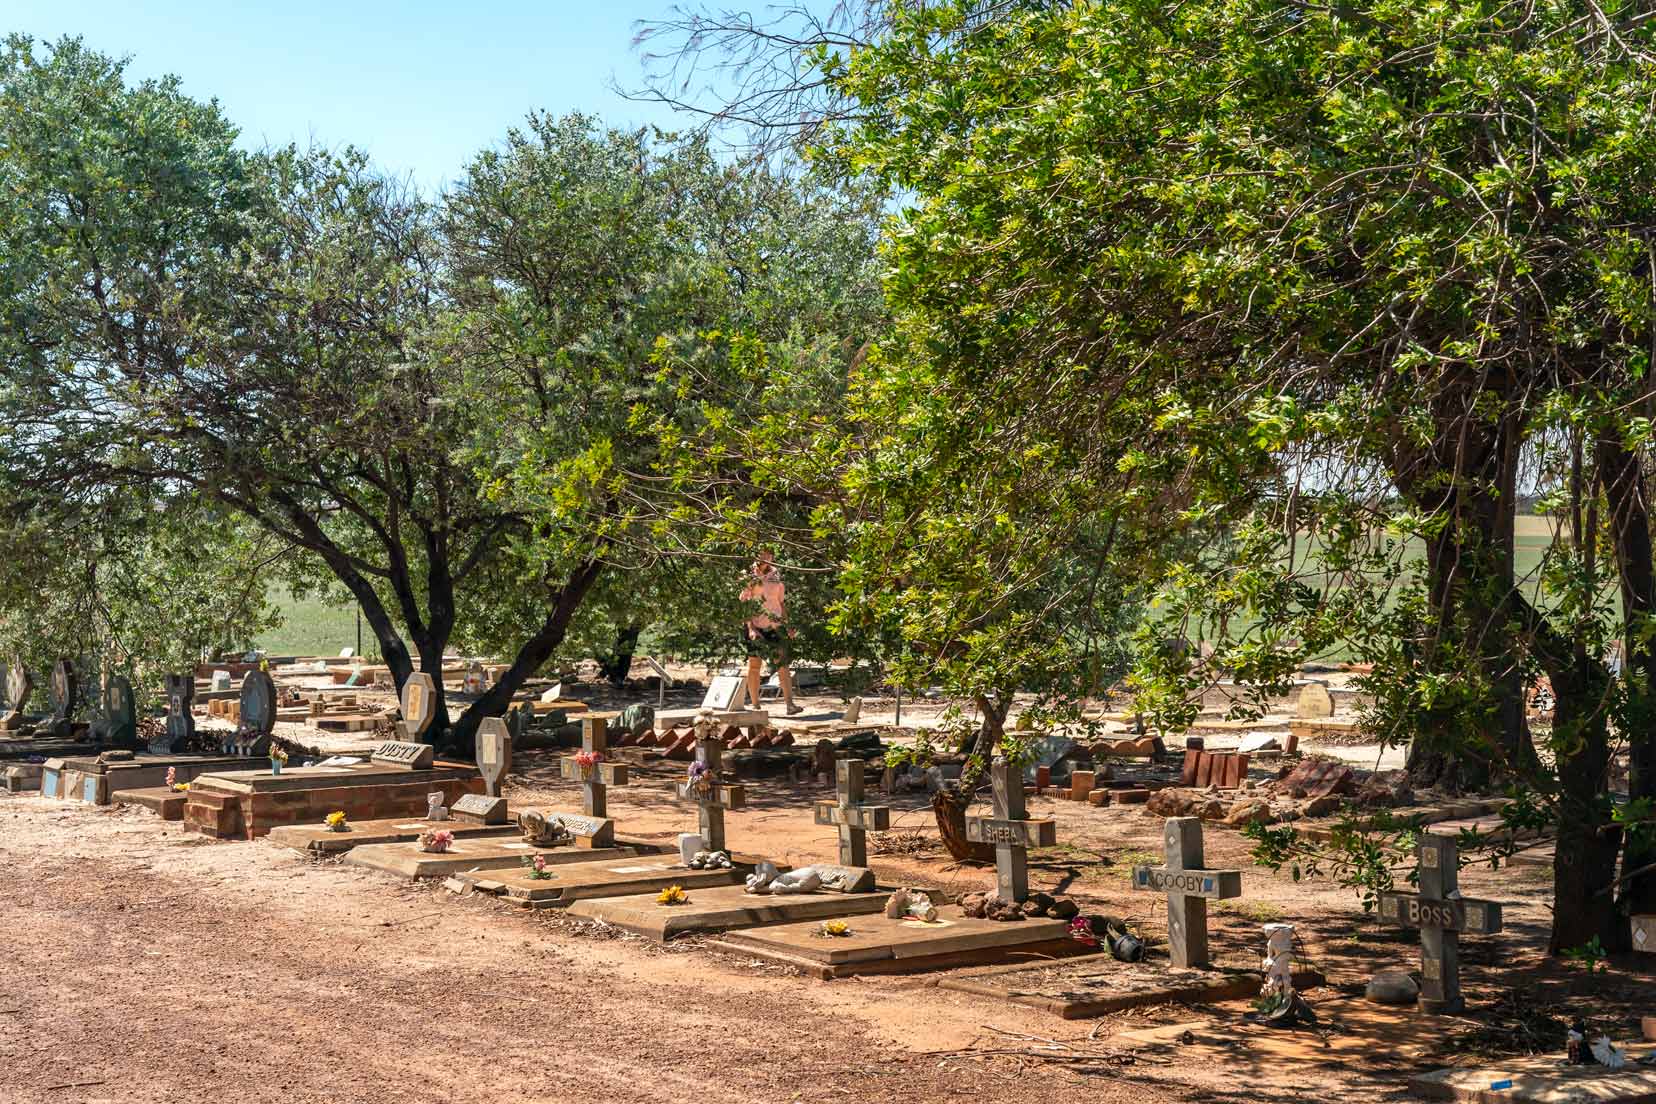 graves at the dog cemetery in Corrigin with trees above